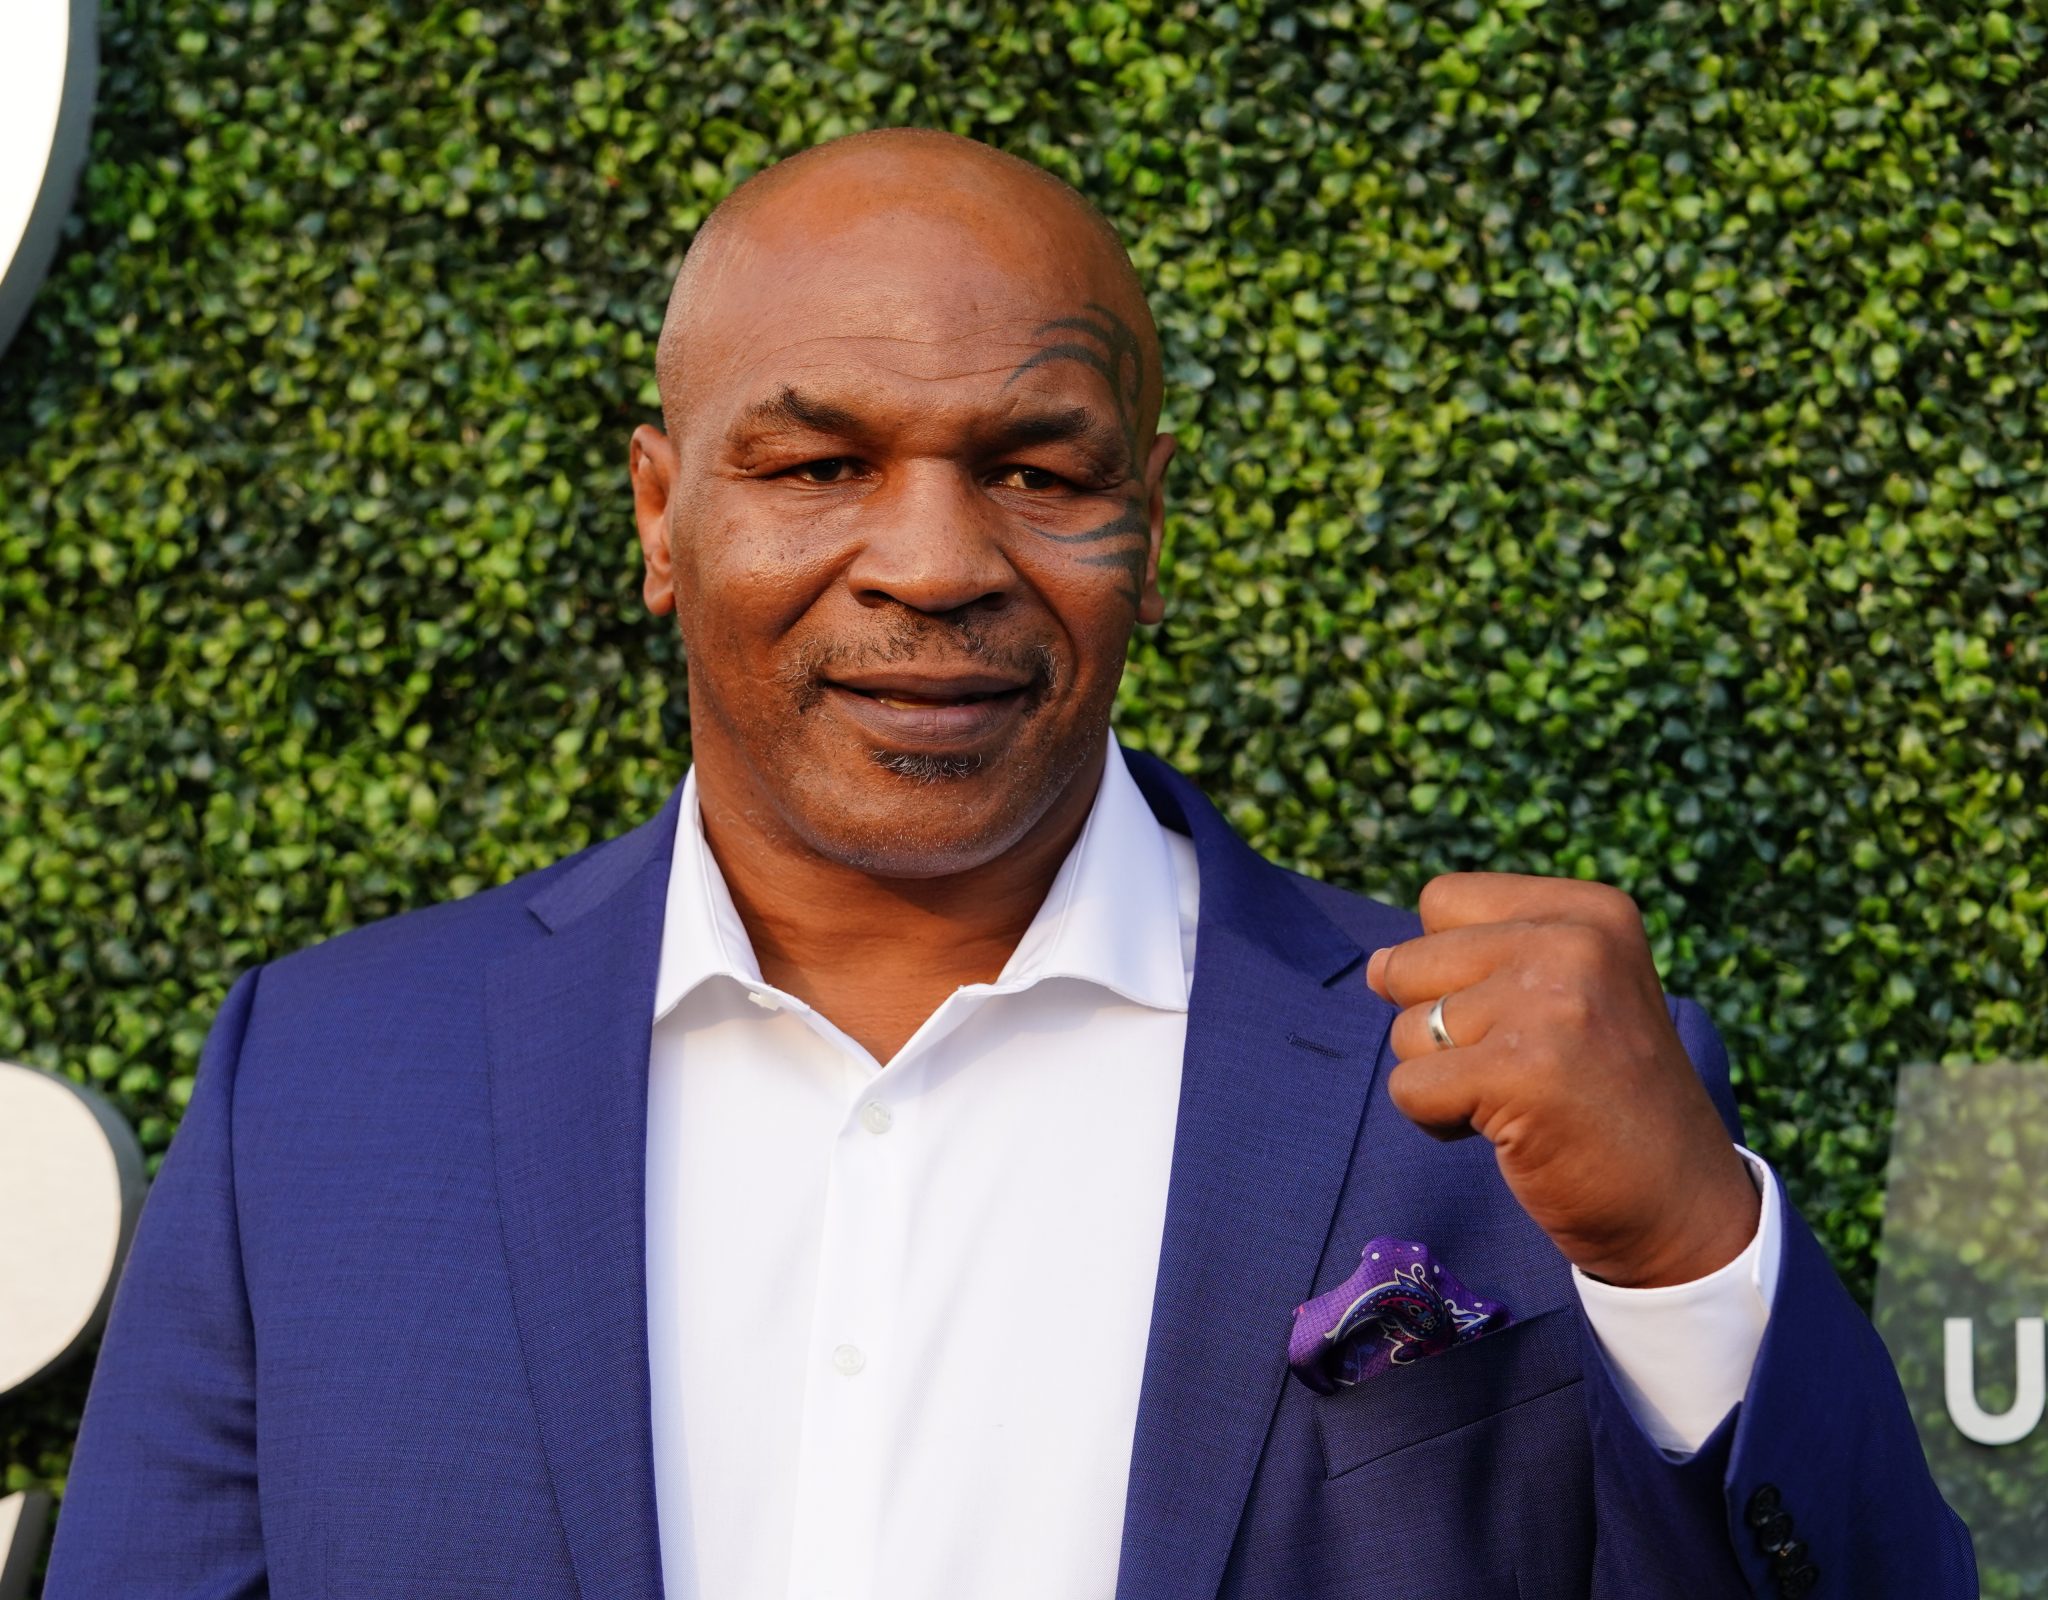 Mike Tyson is set to fight Jake Paul next?